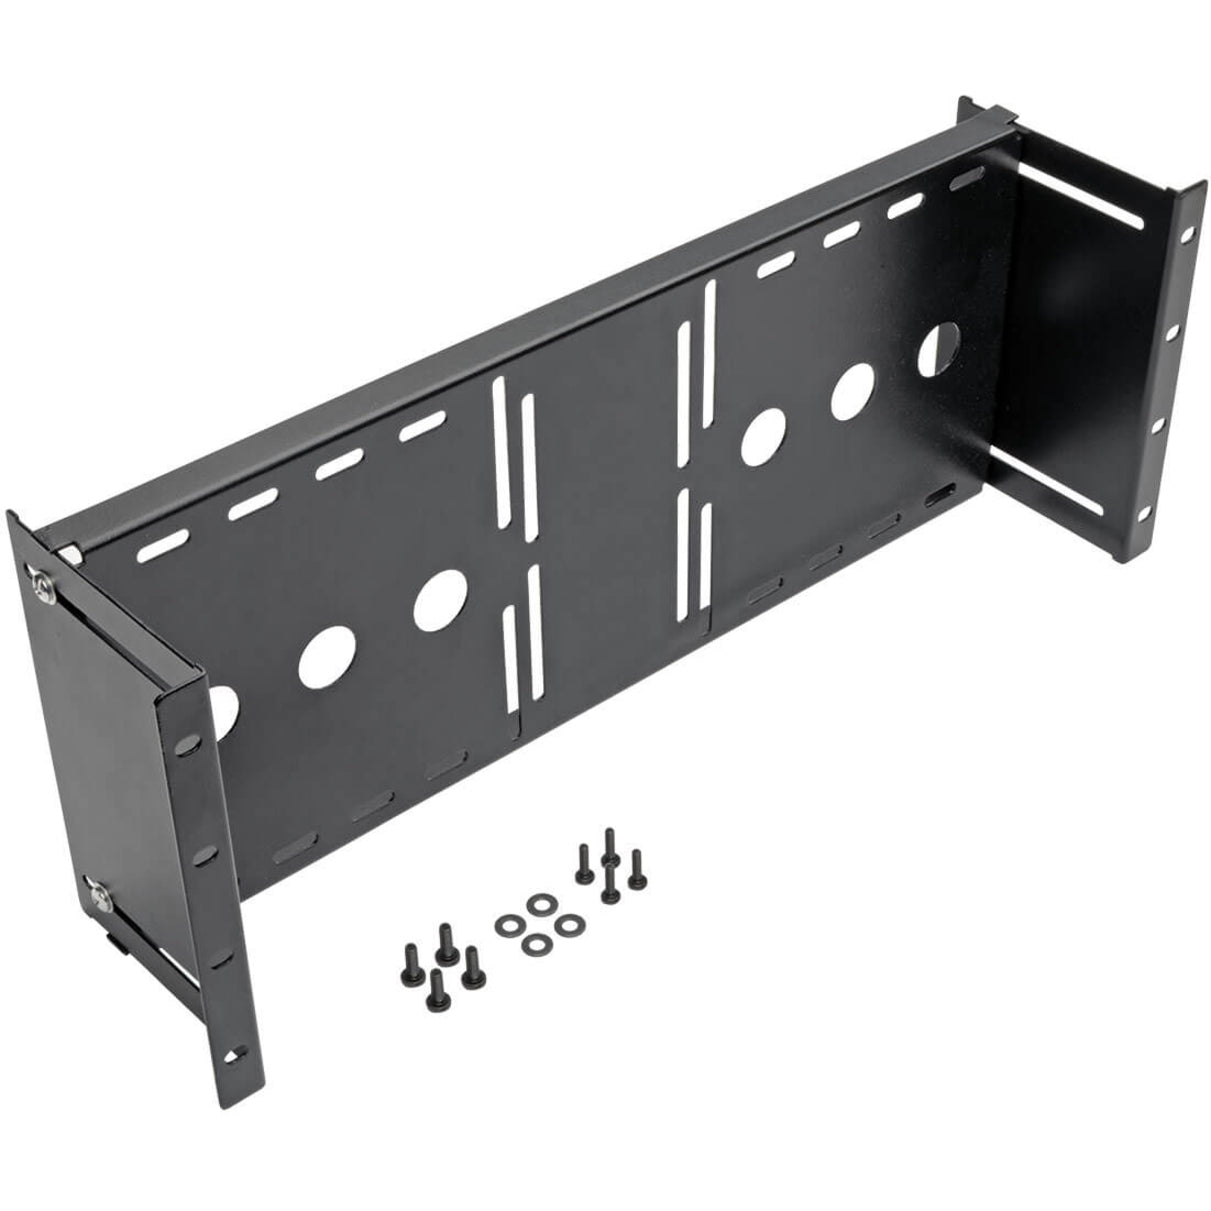 Tripp Lite SmartRack Monitor Rack-Mount Bracket 4U for LCD Monitor up to 17-19 in.